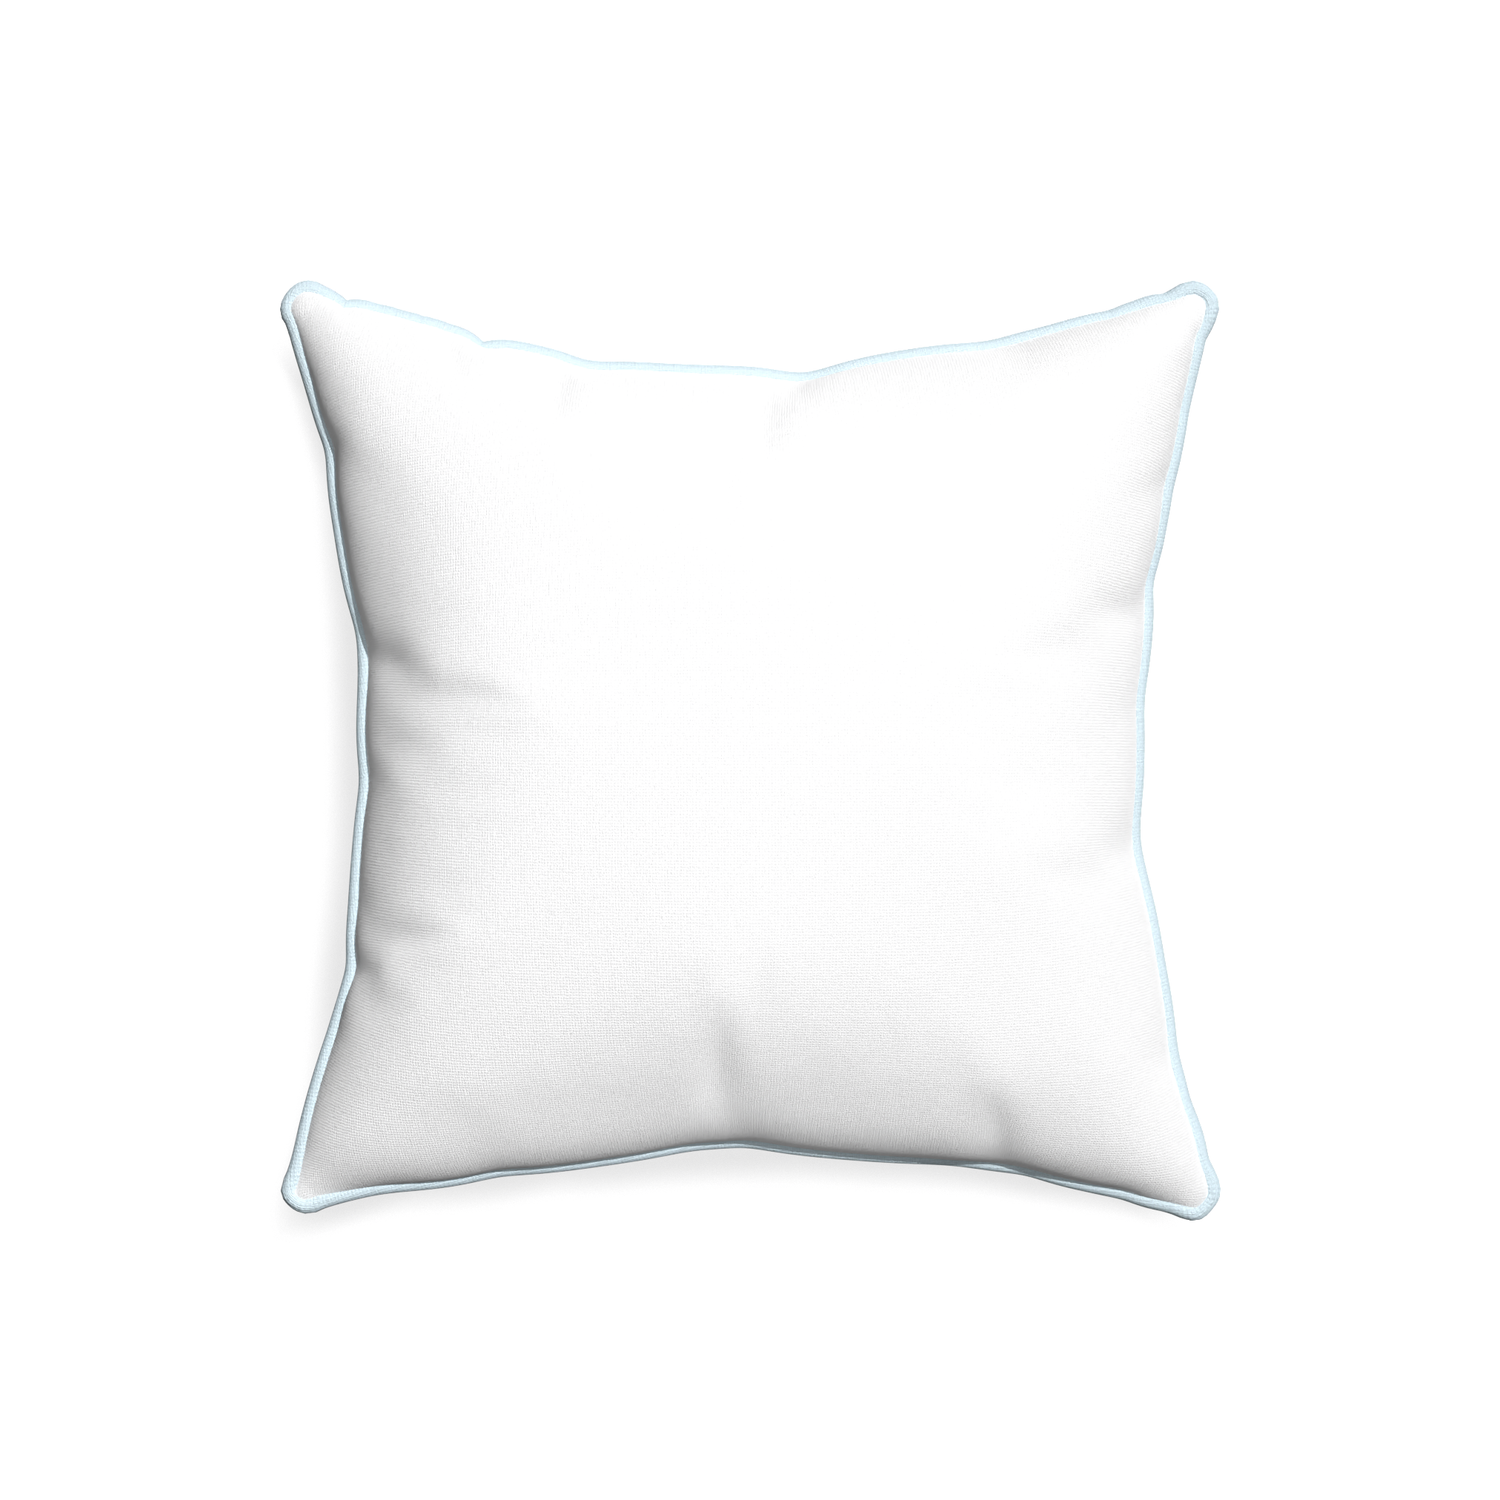 20-square snow custom pillow with powder piping on white background